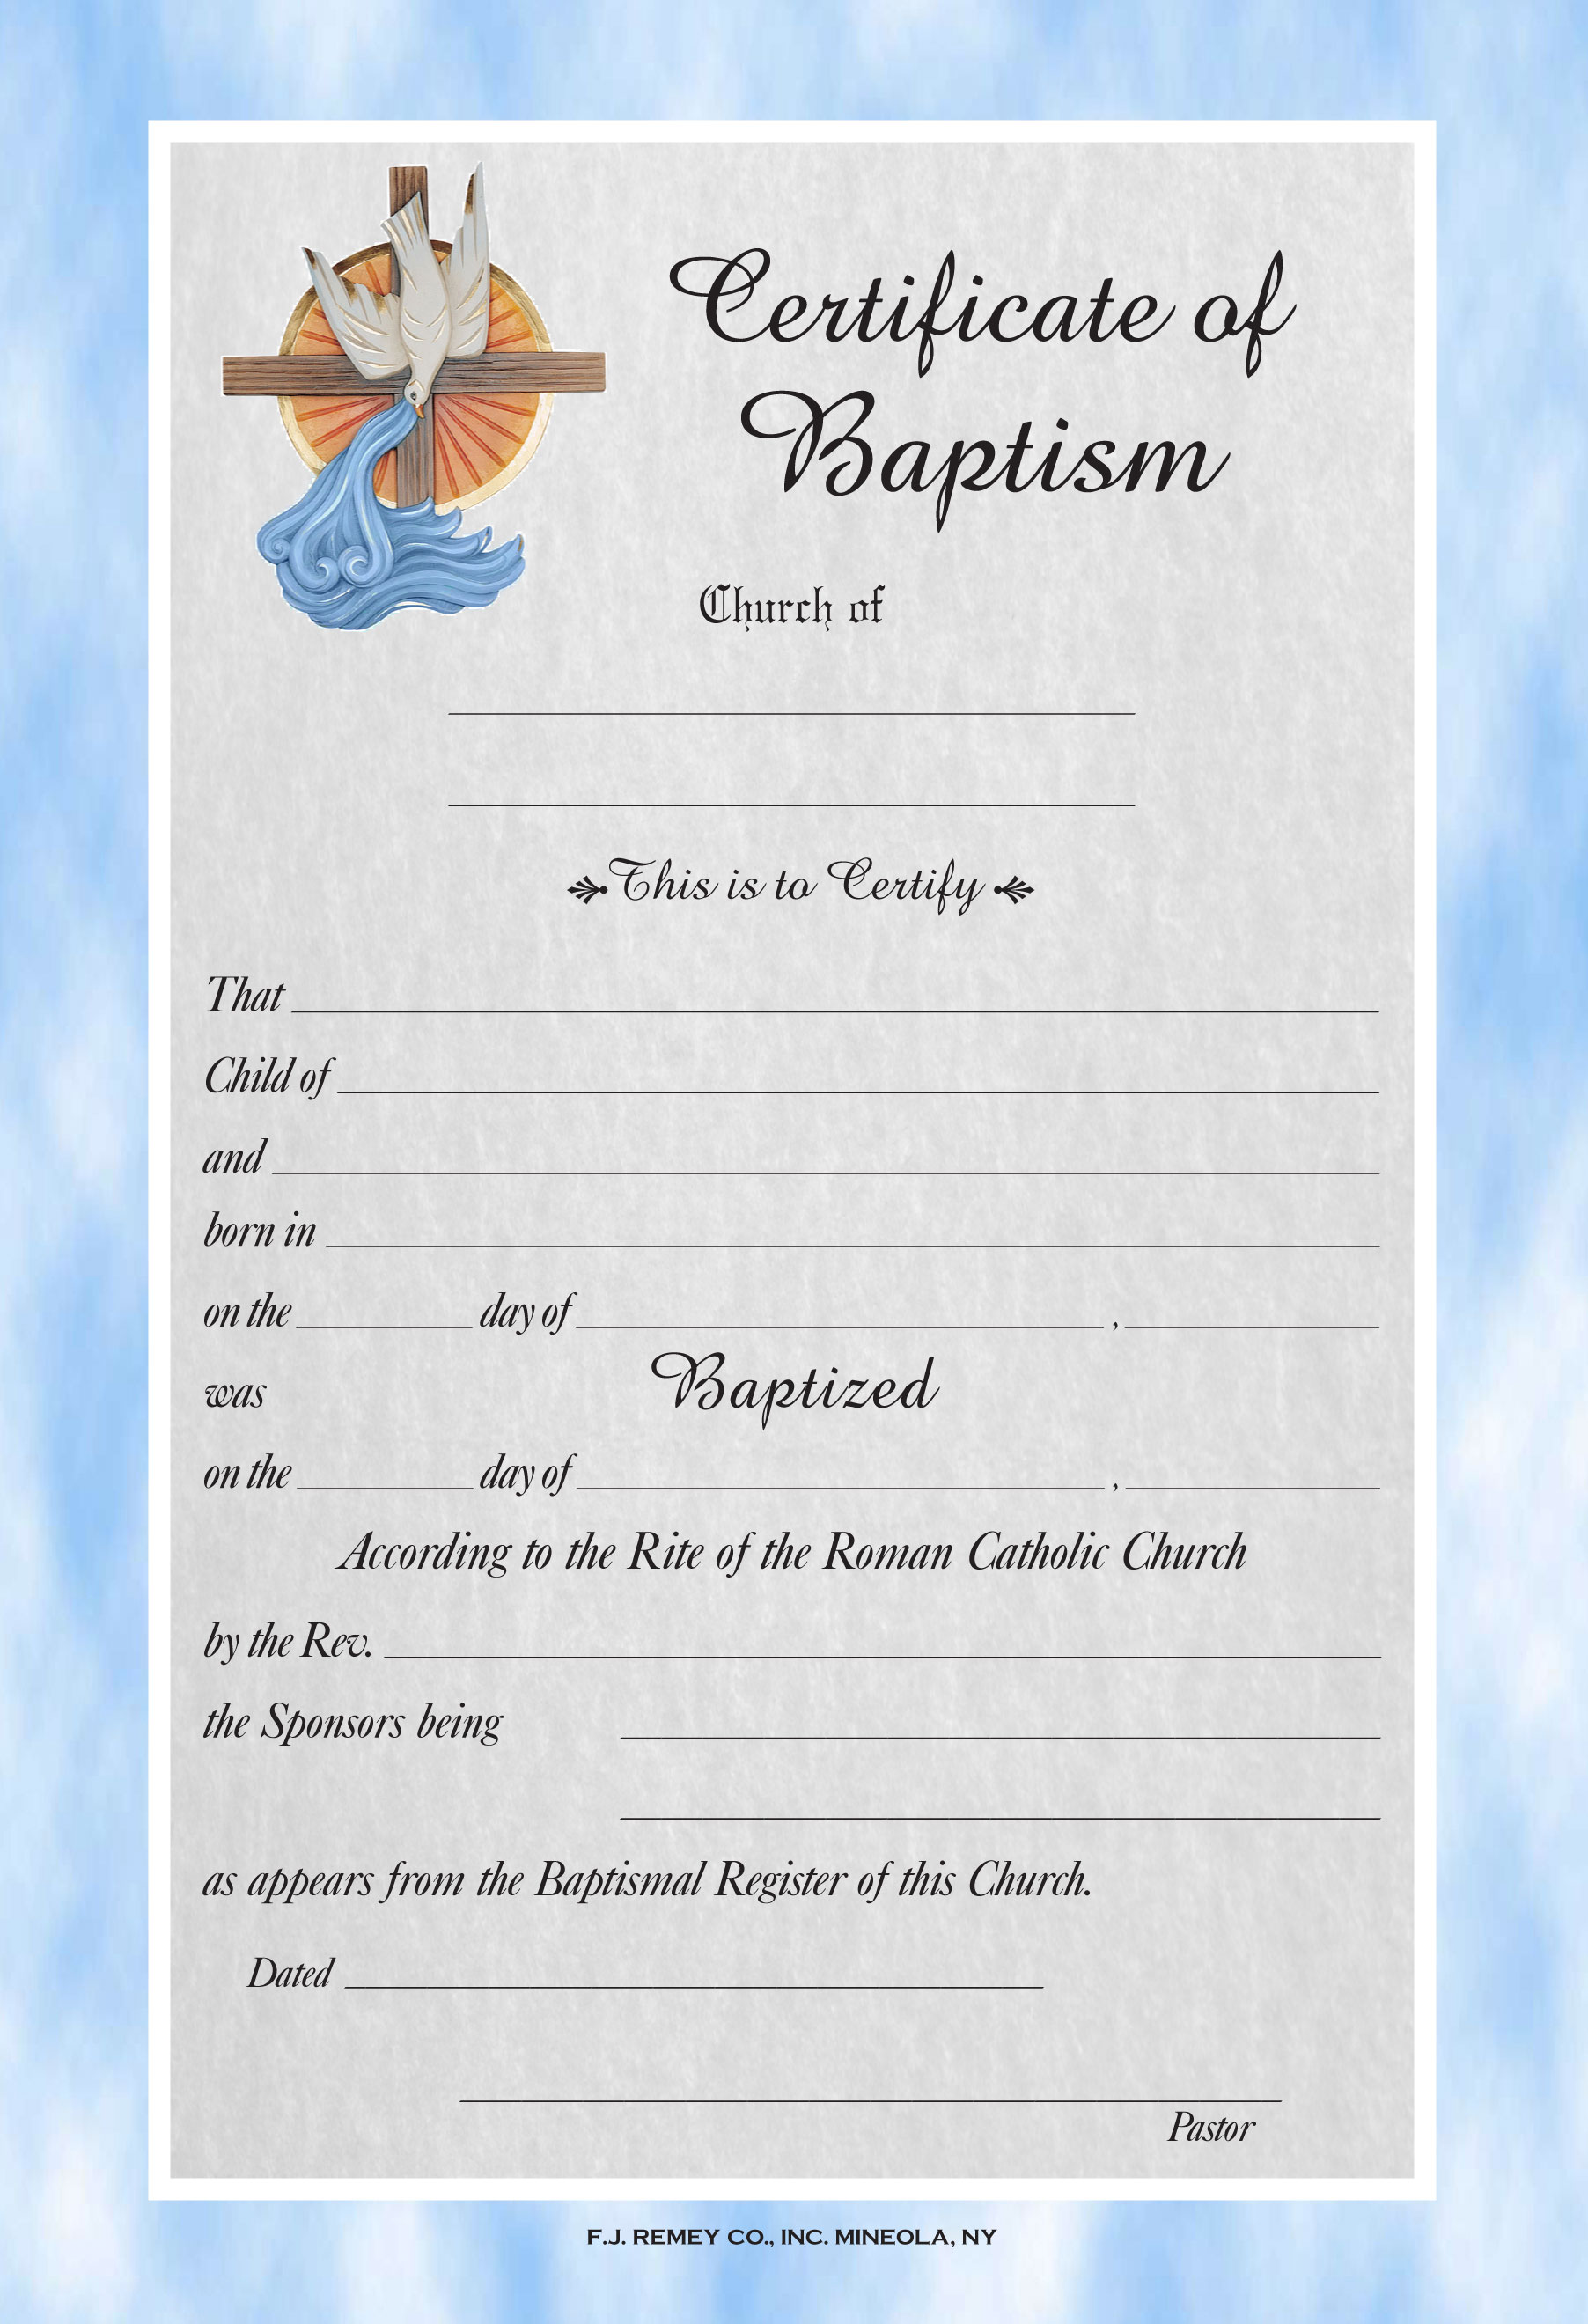 Bilingual Certificate of Baptism with Blue Border